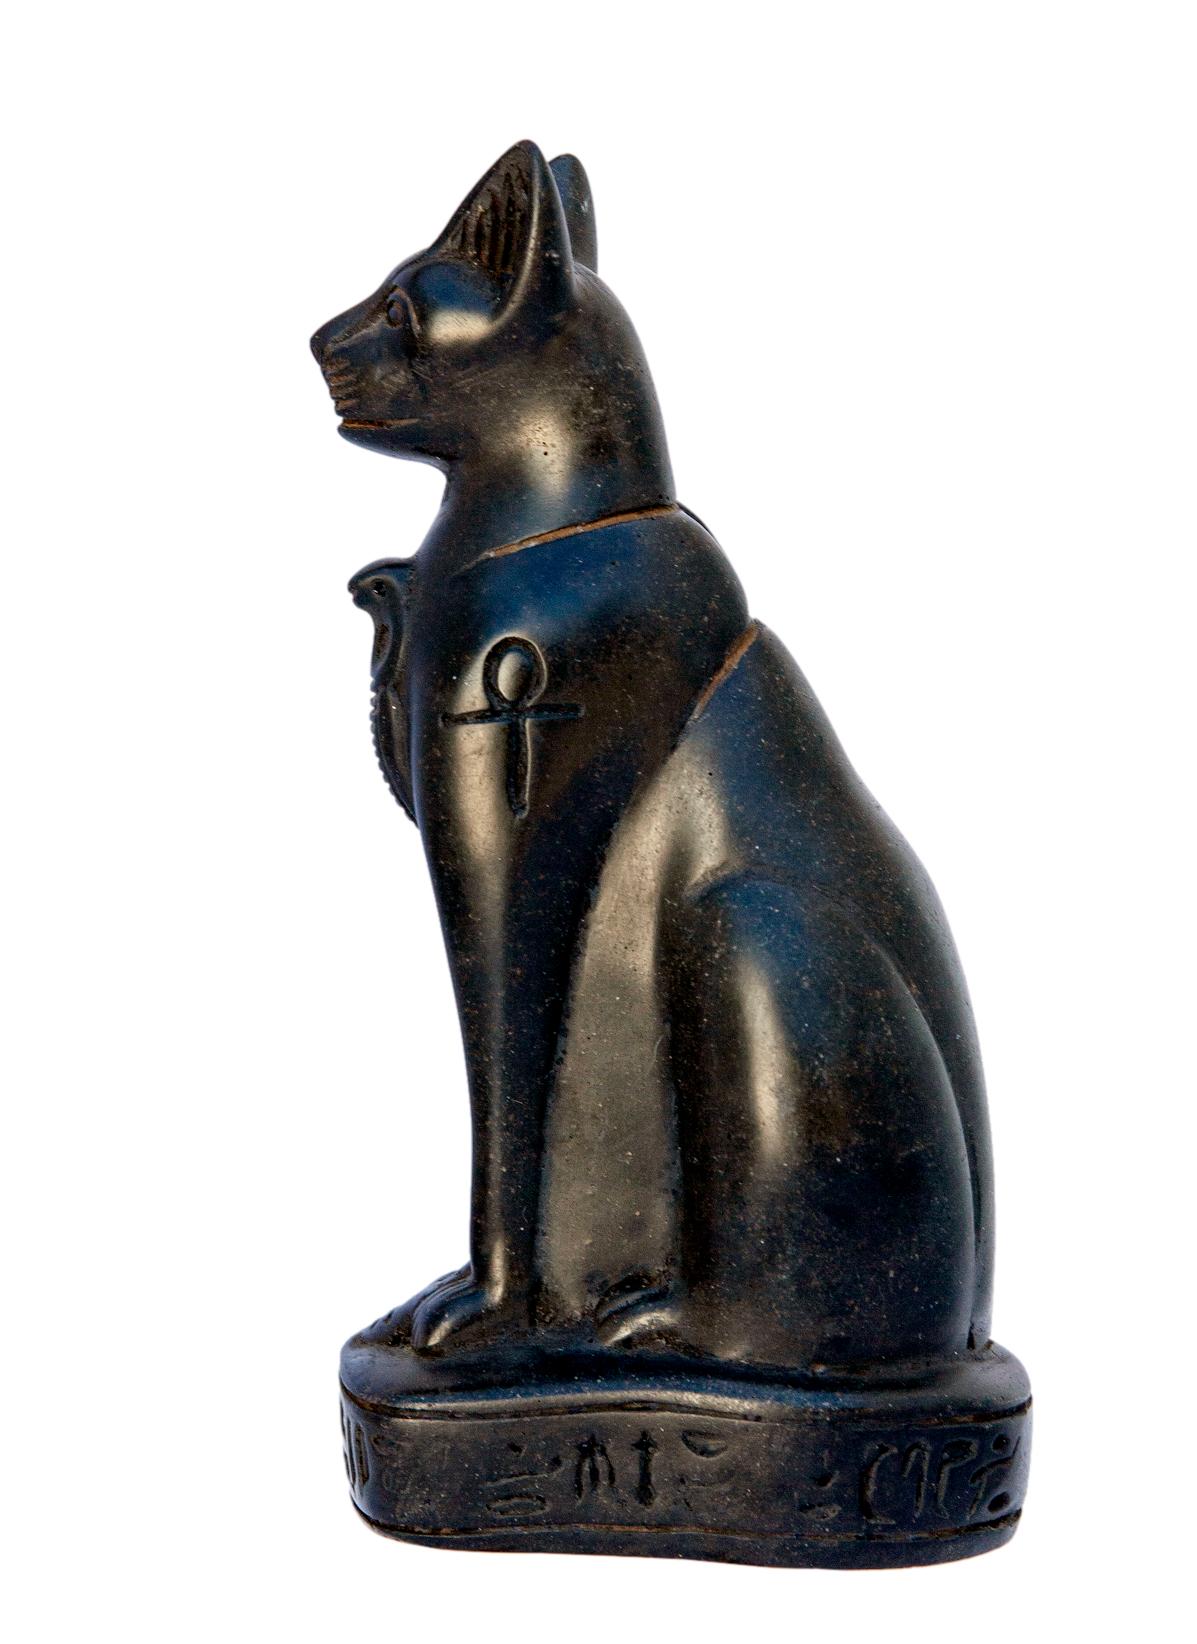 Epyptian goddess of love, the baset cat figurine has been cast in a black stonelike material. Very heavy for its size.
.